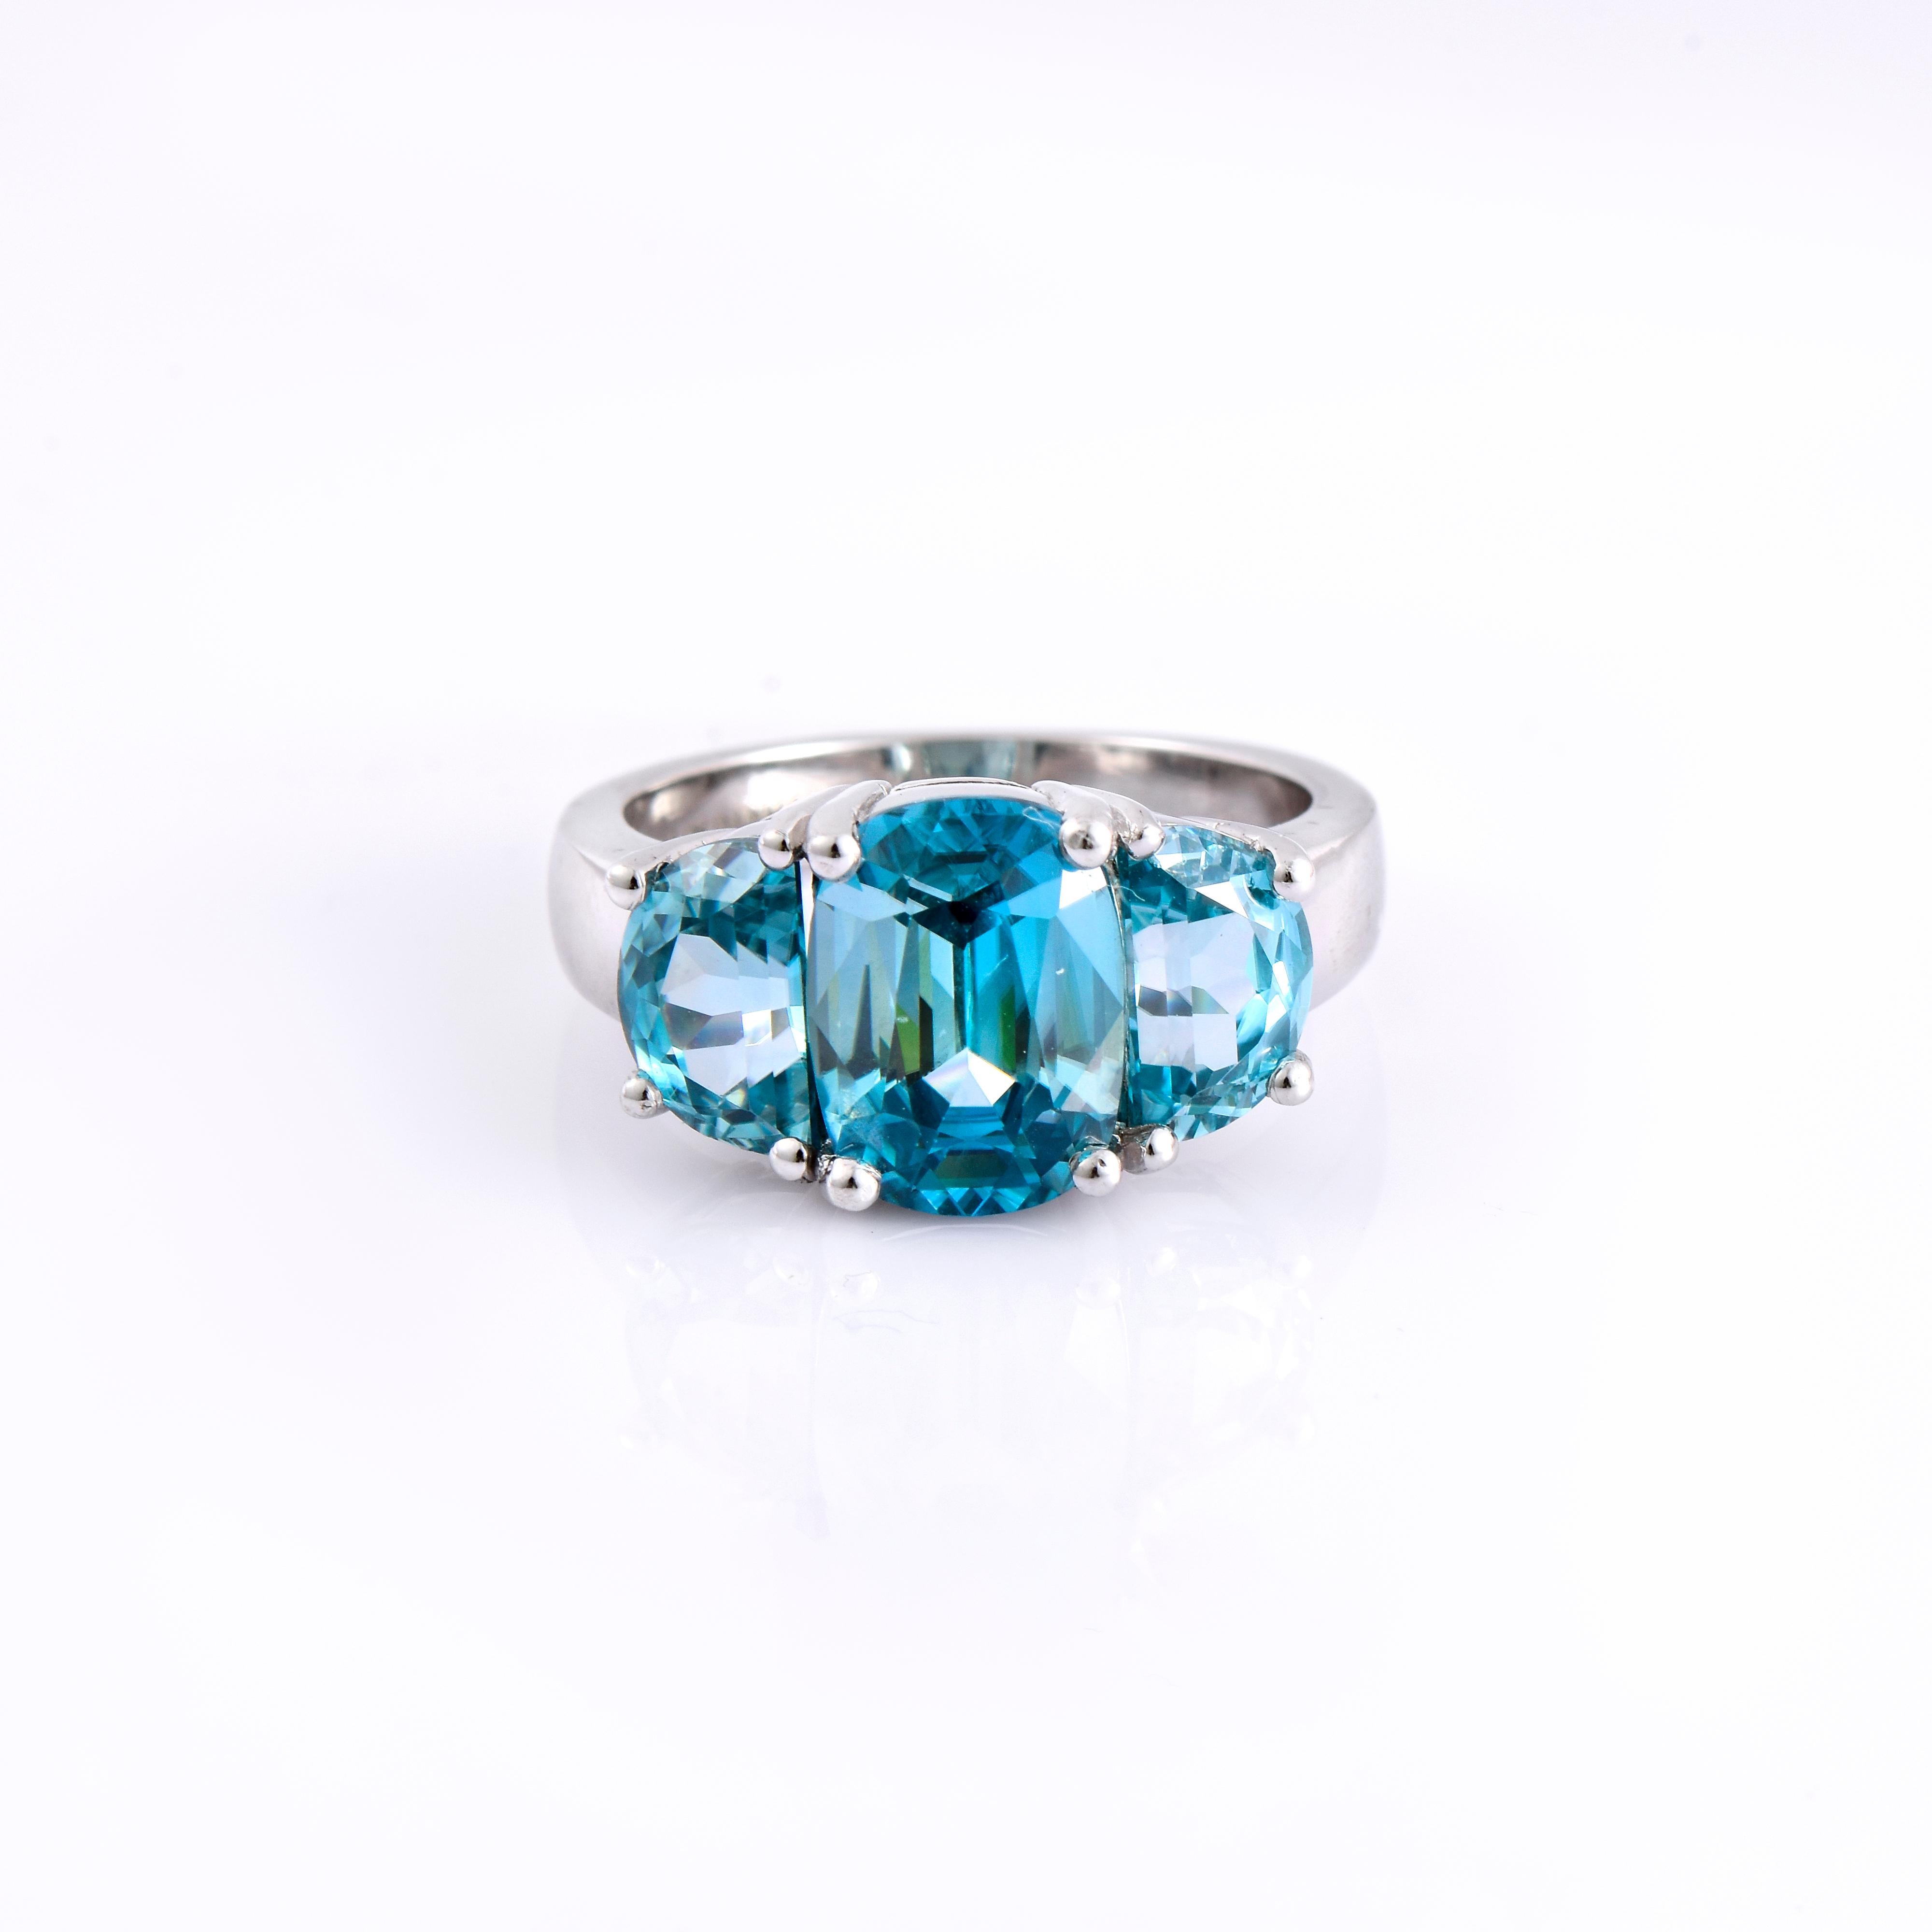 Contemporary Orloff of Denmark, 8.06 ct Natural Blue Zircon Ring in 925 Sterling Silver For Sale